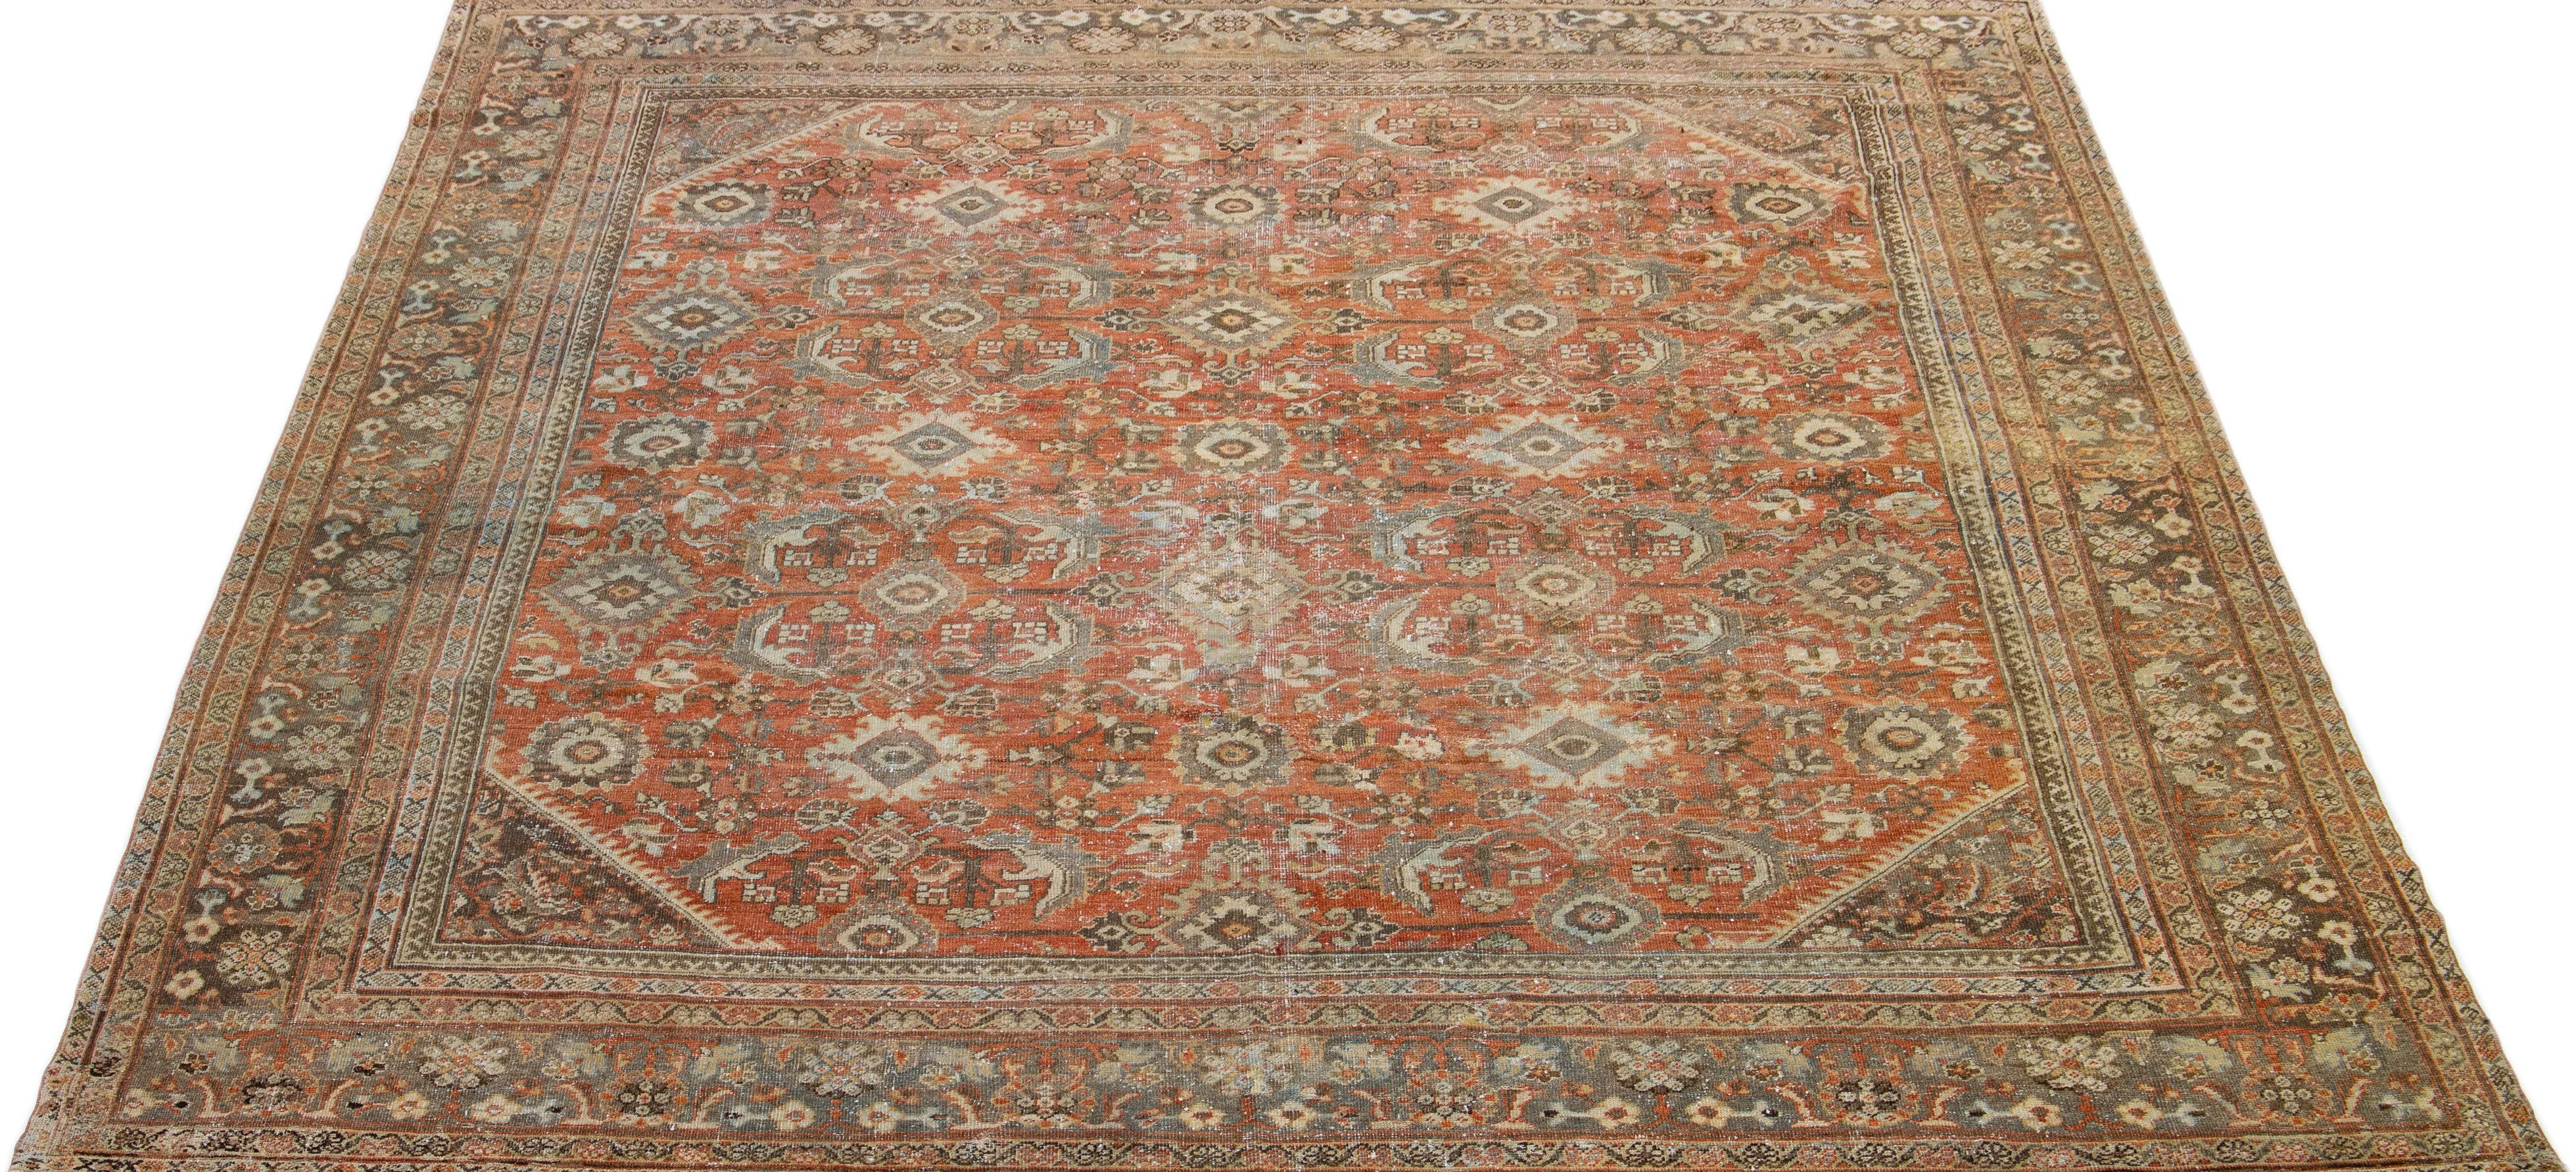 Beautiful hand-knotted antique mahal wool rug with a red color field. This Persian rug has blue and brown accent colors in an all-over floral design. 

This rug measures: 10'4